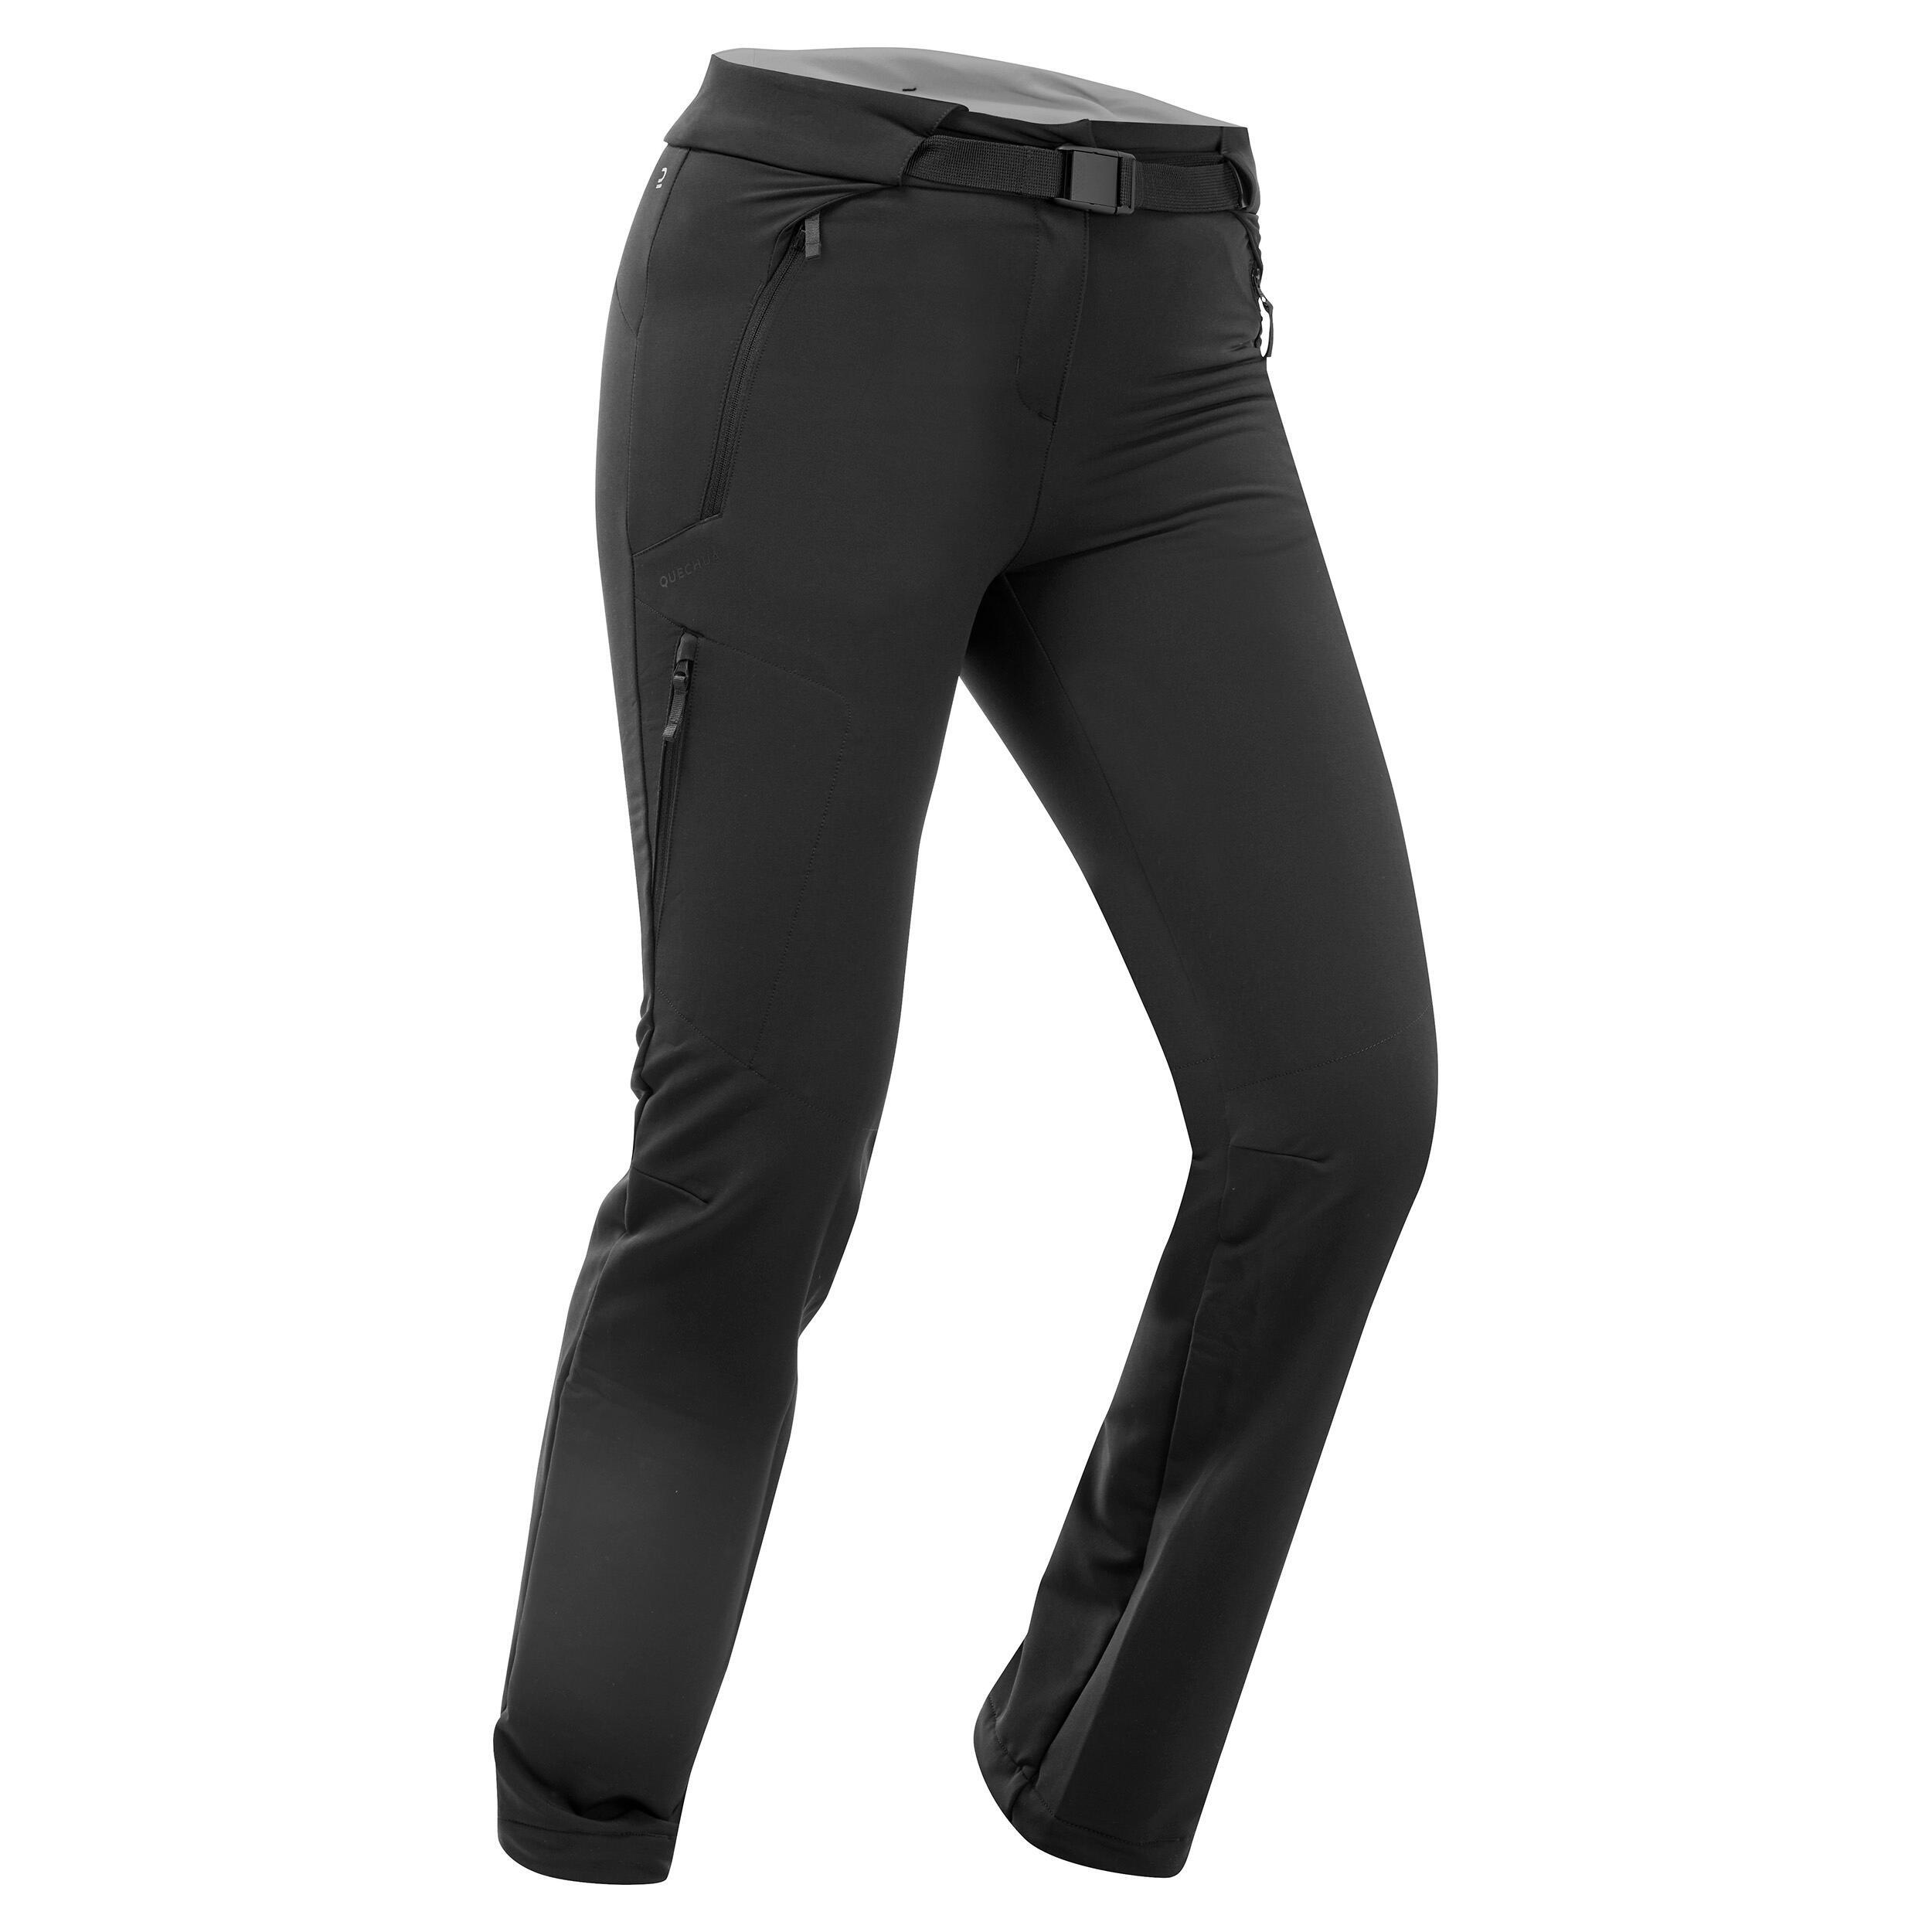 WOMEN'S WARM WATER-REPELLENT SNOW HIKING TROUSERS - SH500 MOUNTAIN 4/17